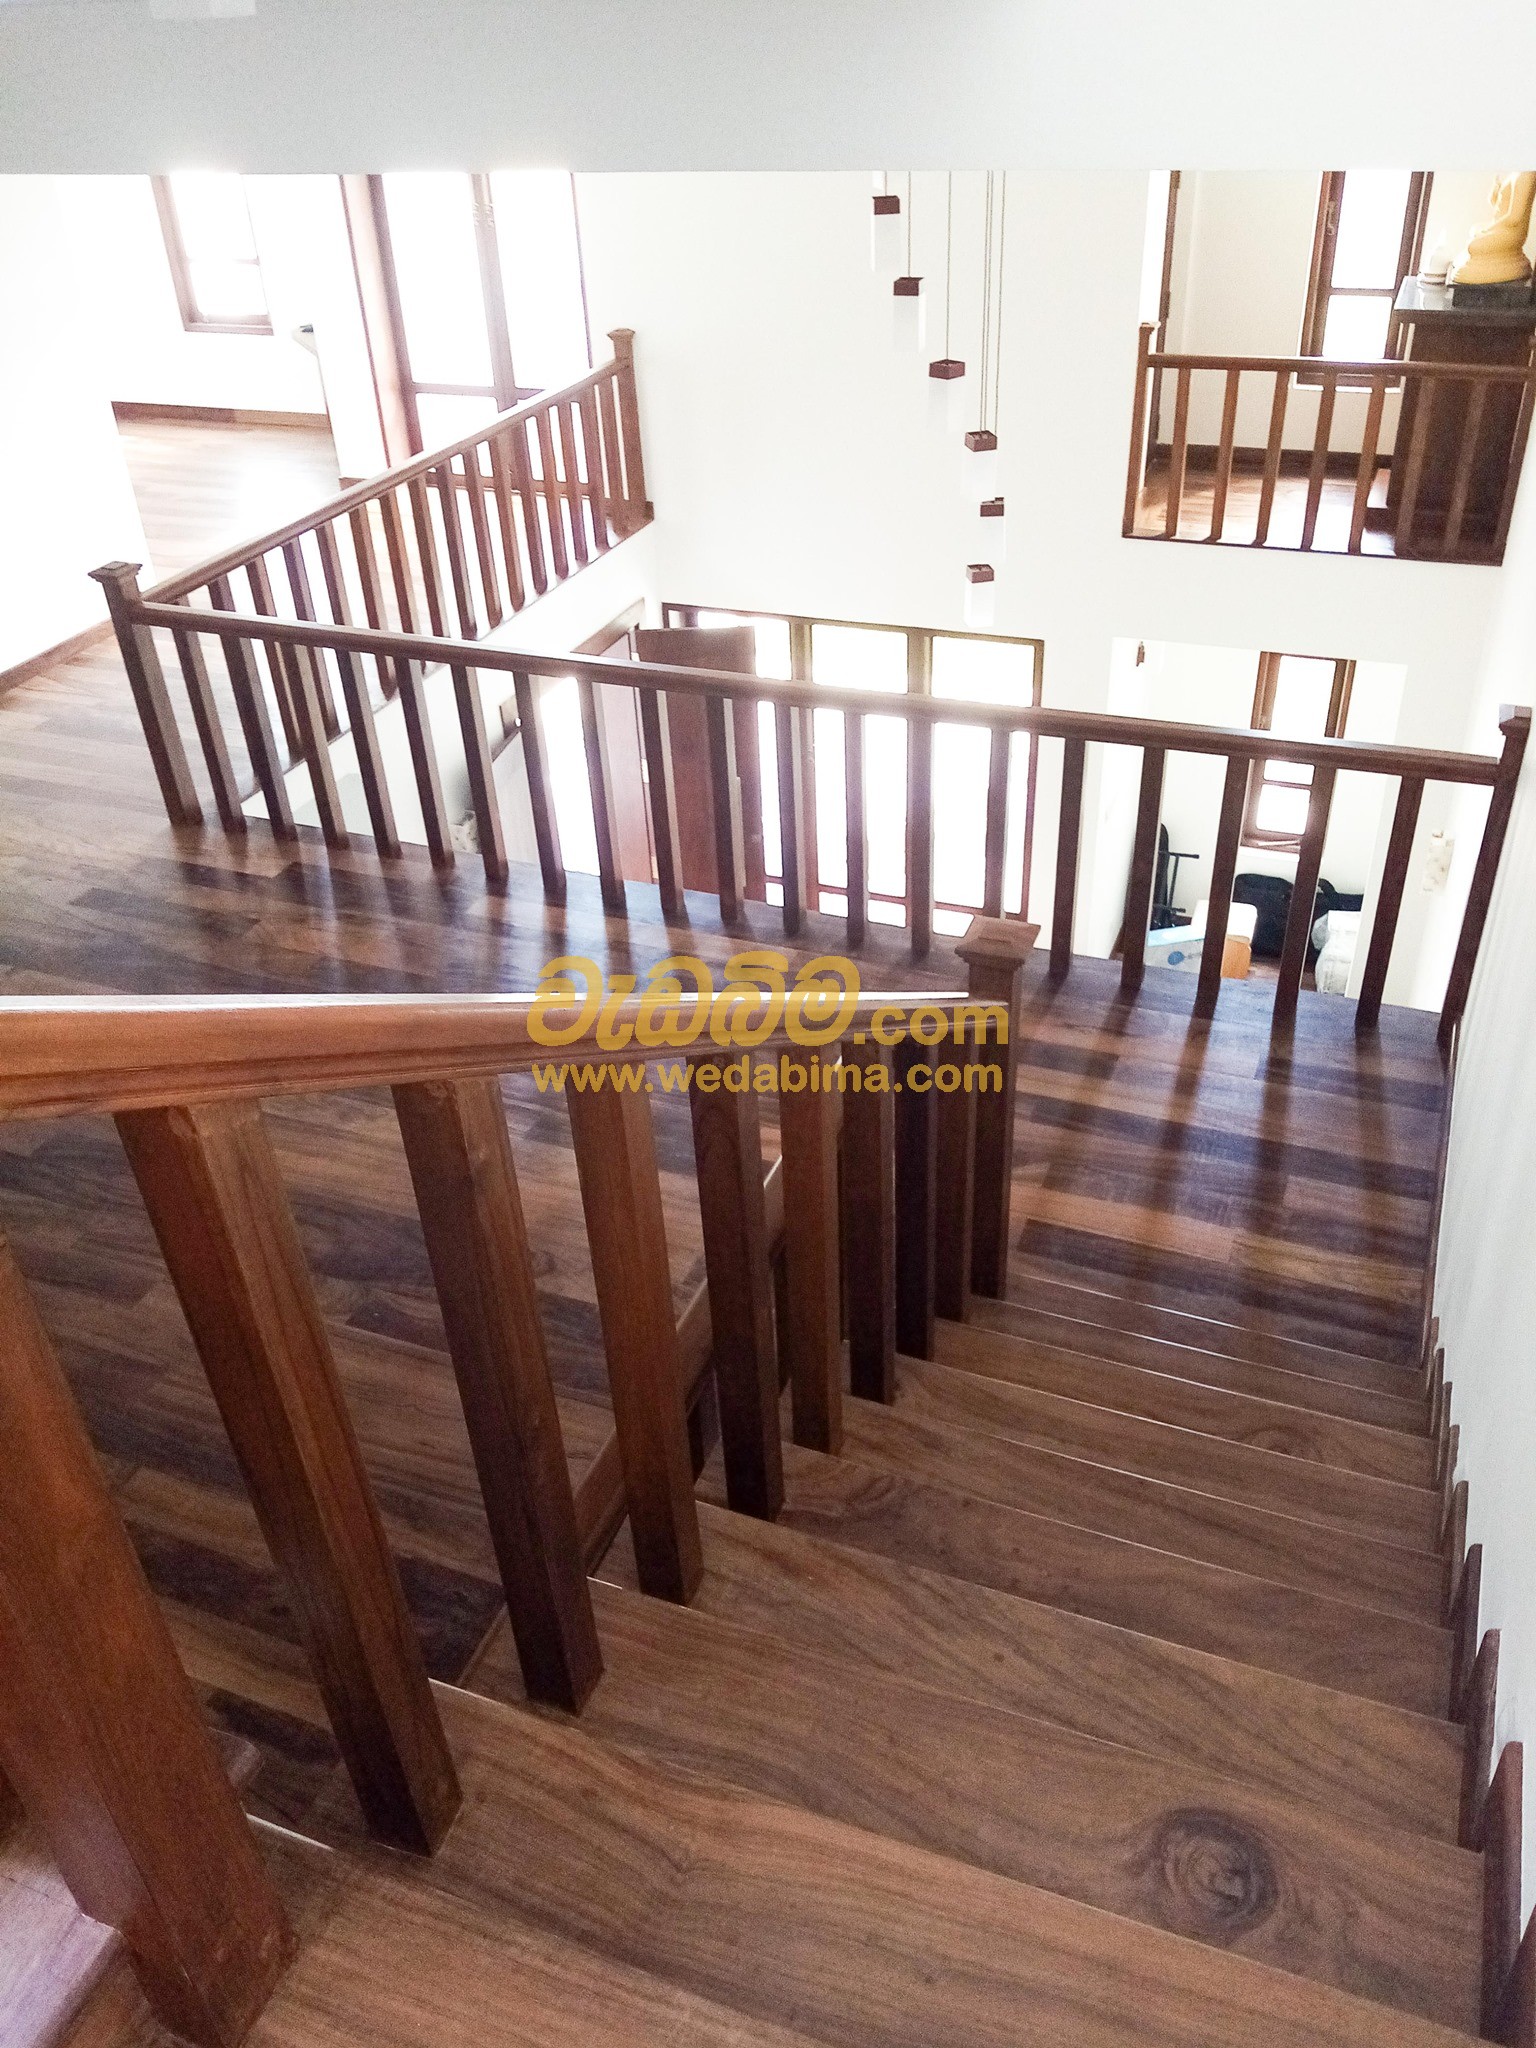 Cover image for Wooden staircase railing design - Colombo